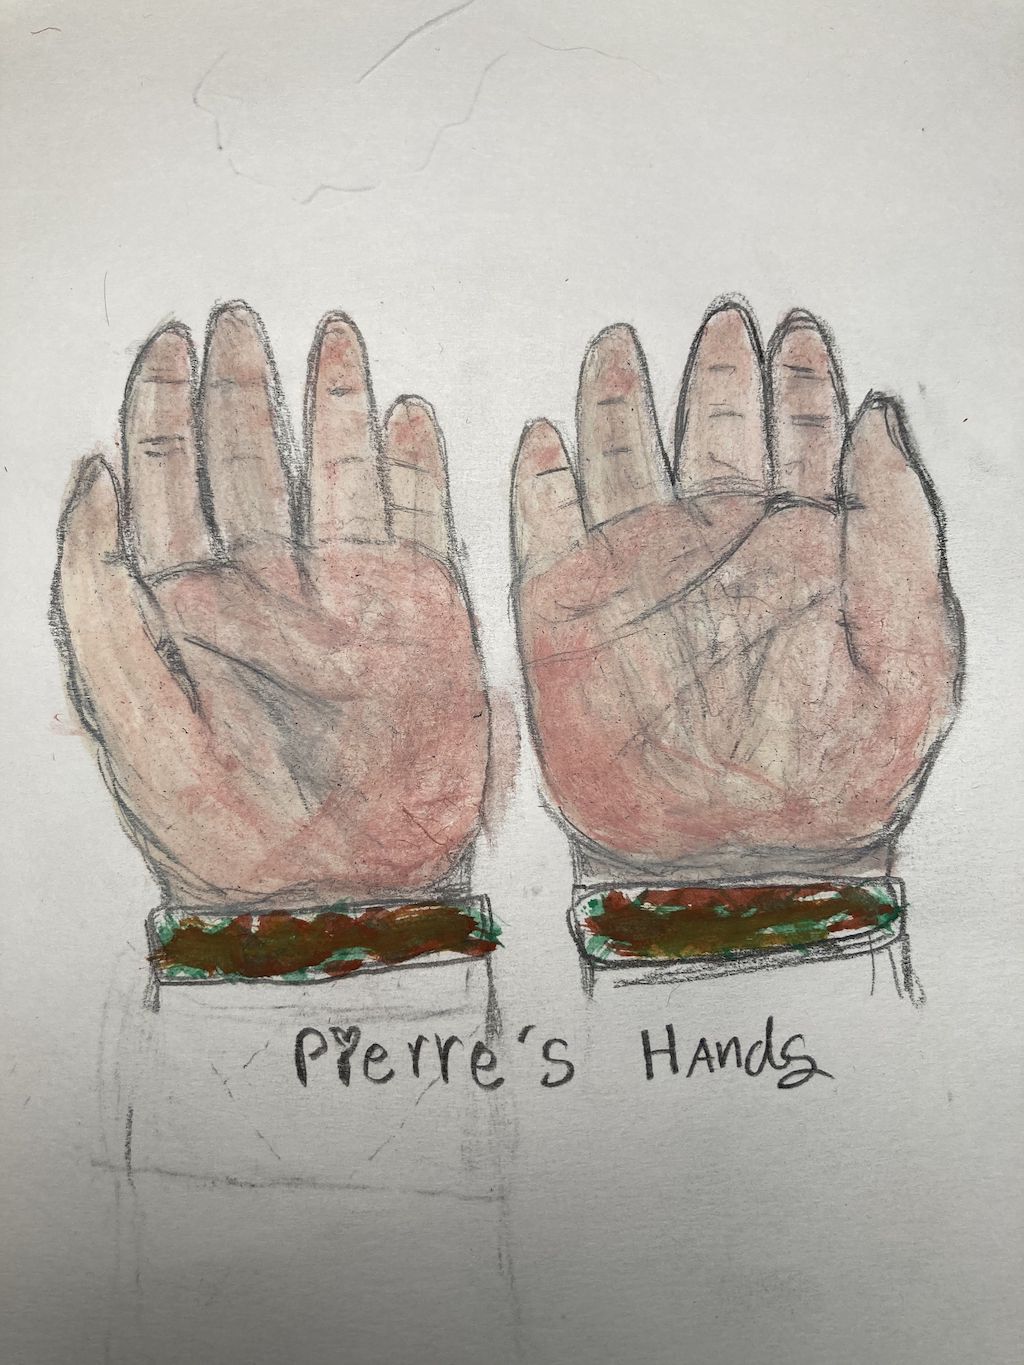 Lucia's incredible drawing of Pierre's hands